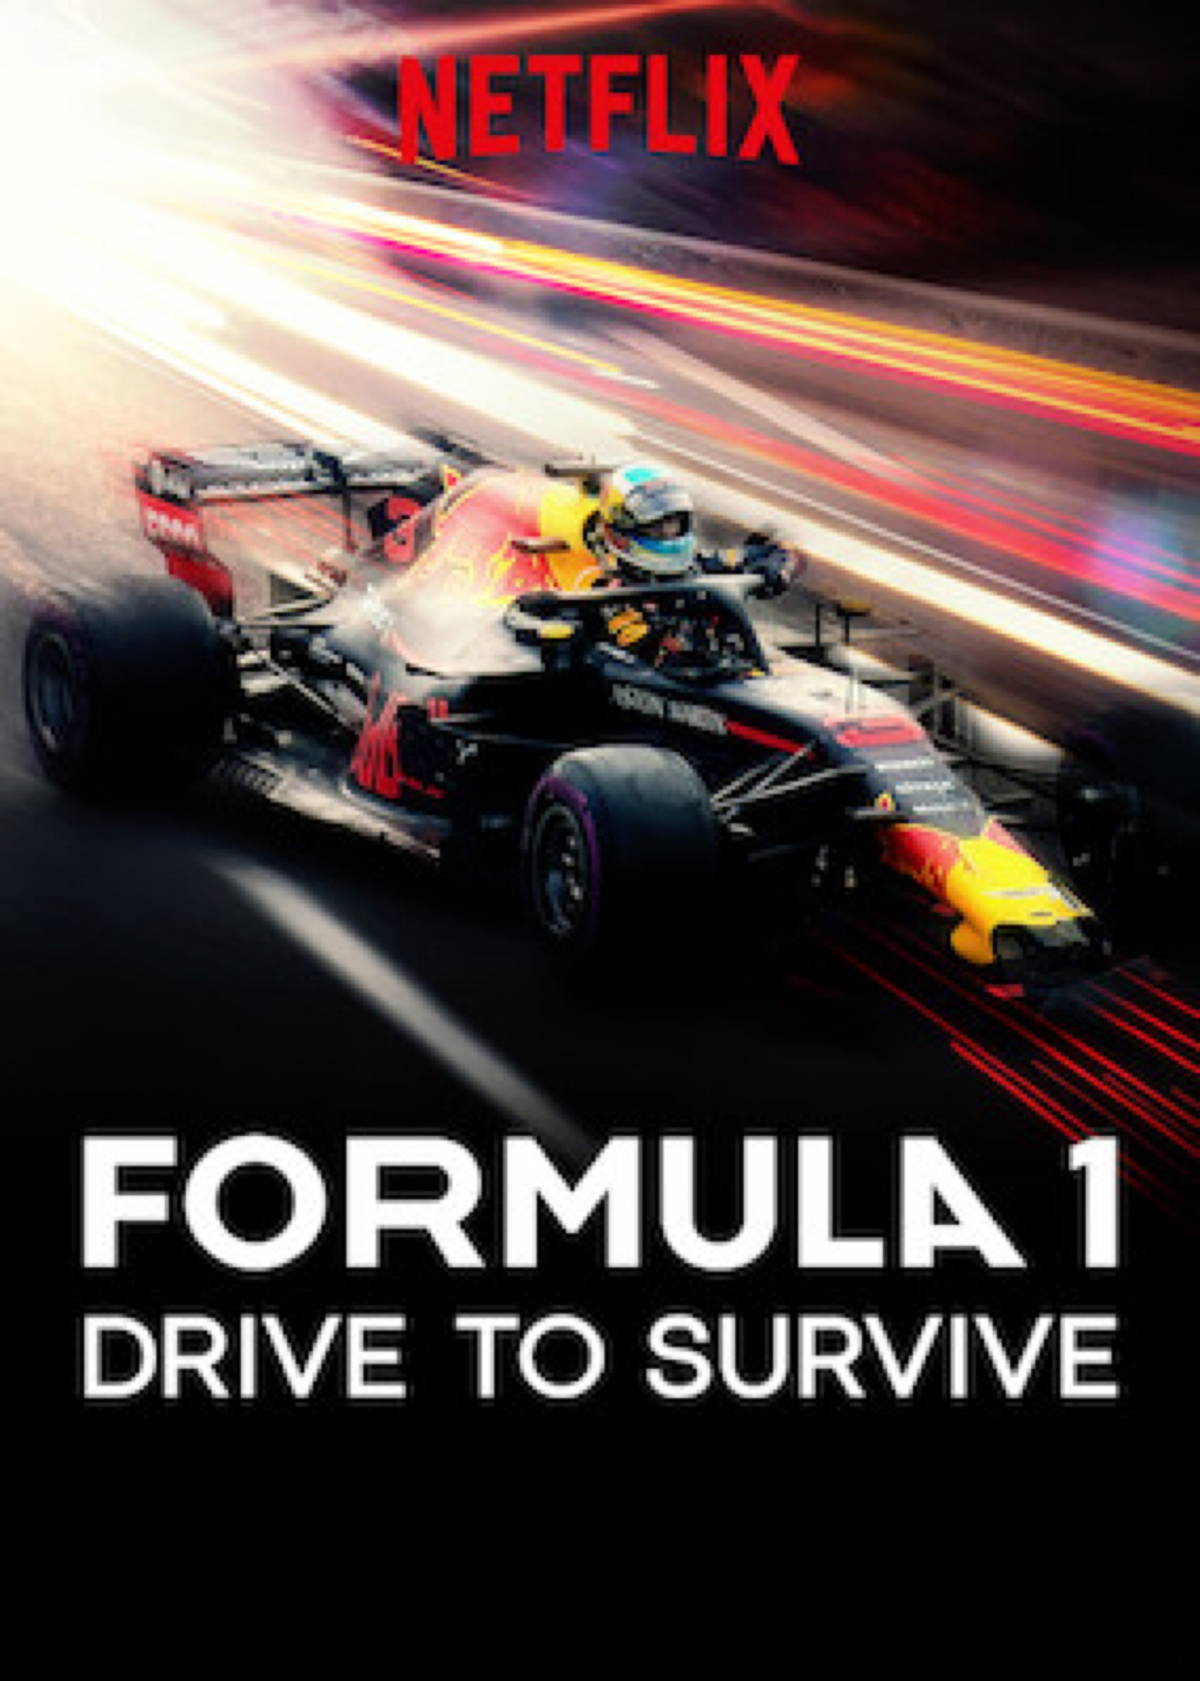 Trailer for new Netflix series “Formula 1: Drive to Survive”